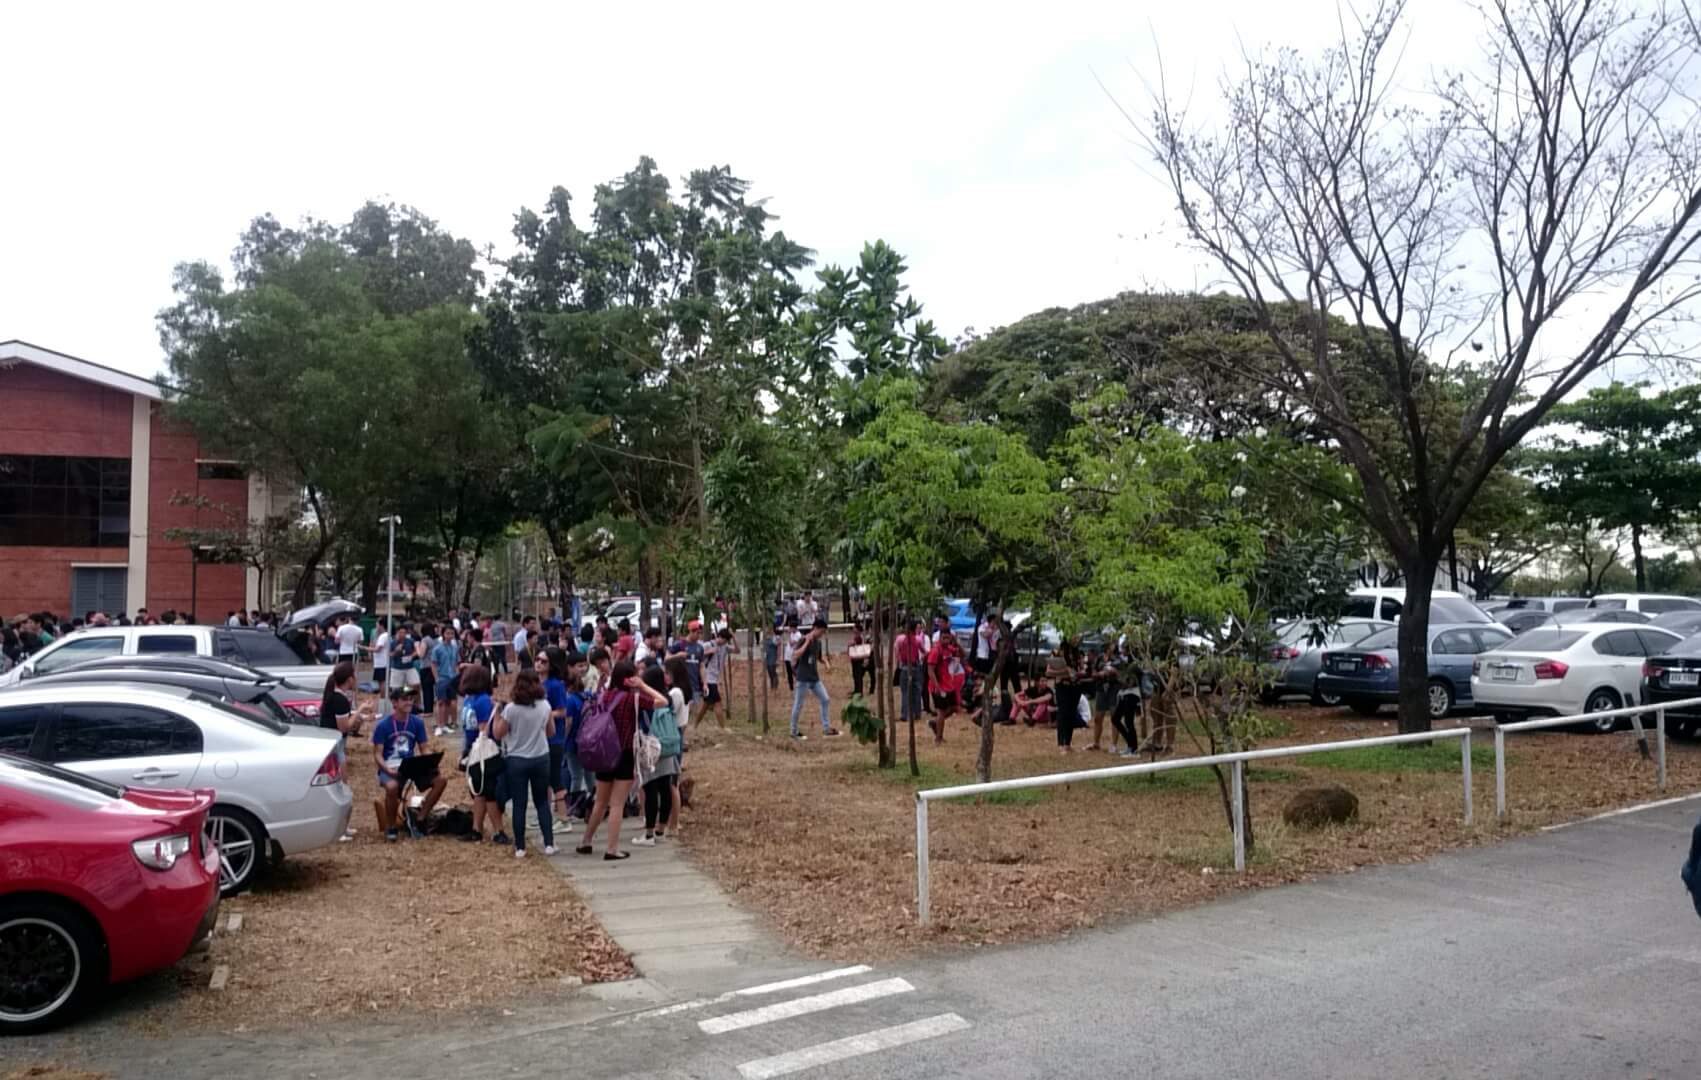 EMERGENCY. Students, faculty, and staff assembling outdoors during an evacuation at the Ateneo de Manila University campus, March 28, 2016. Photo courtesy of Jose Adrian Dalangin  